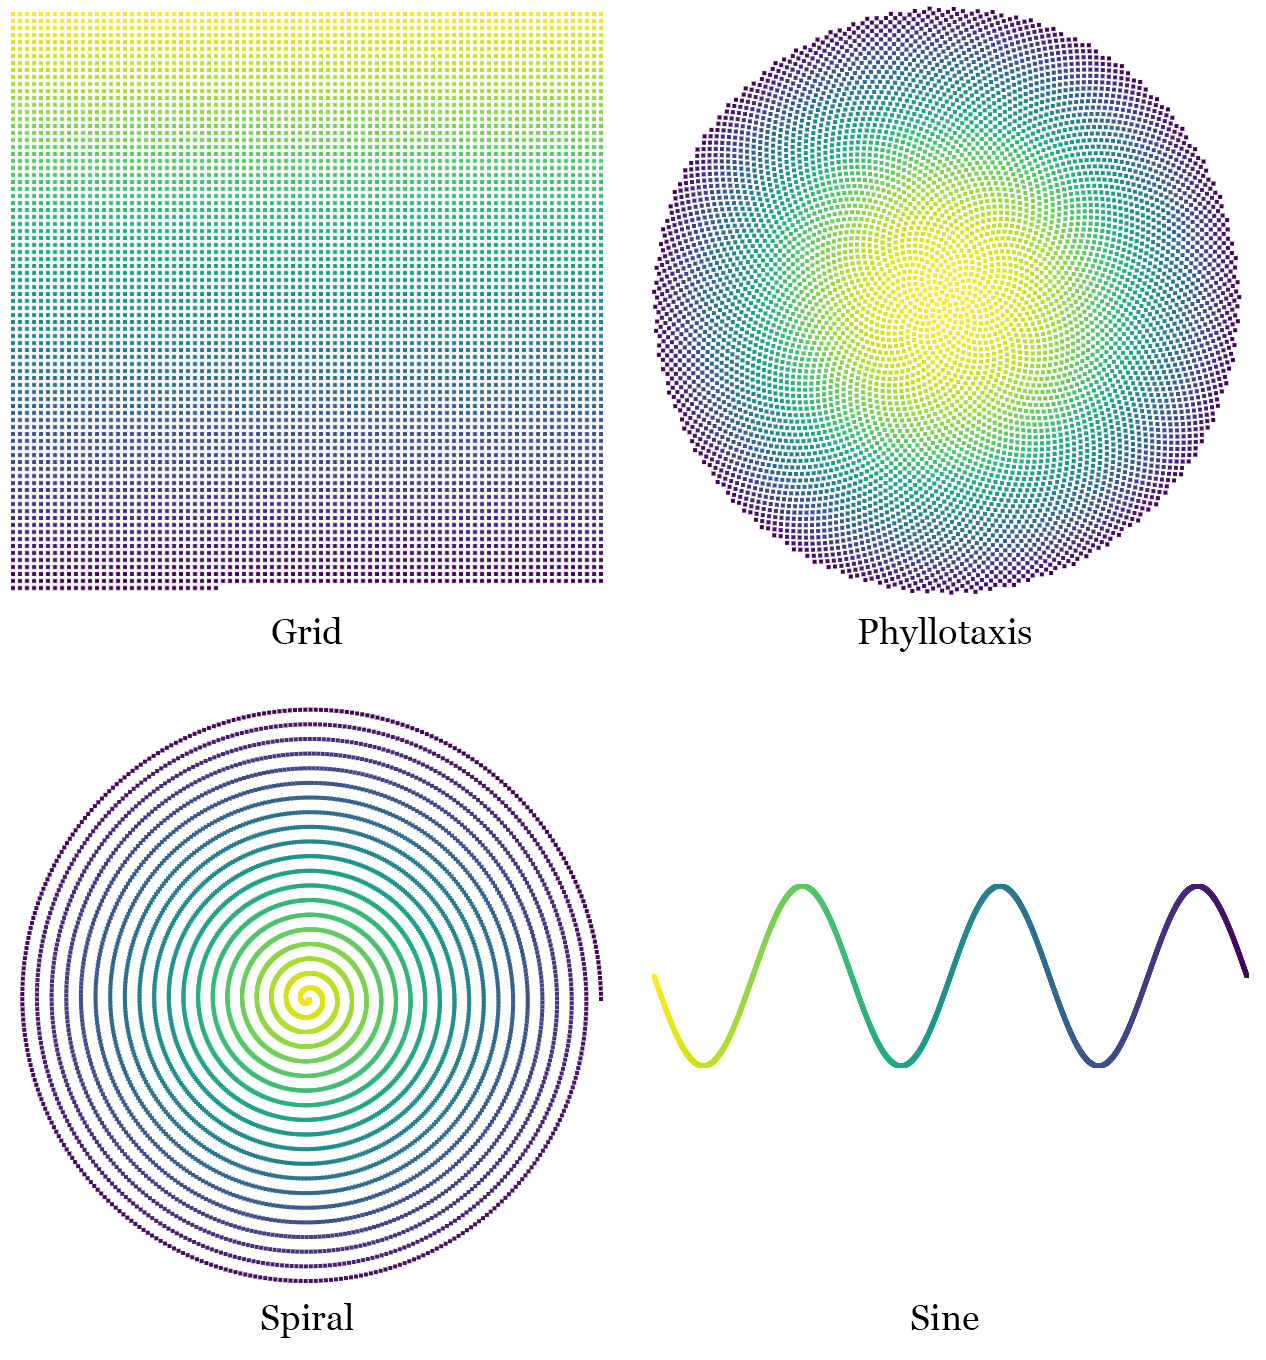 Layouts used in example: grid, phylllotaxis, spiral, sine